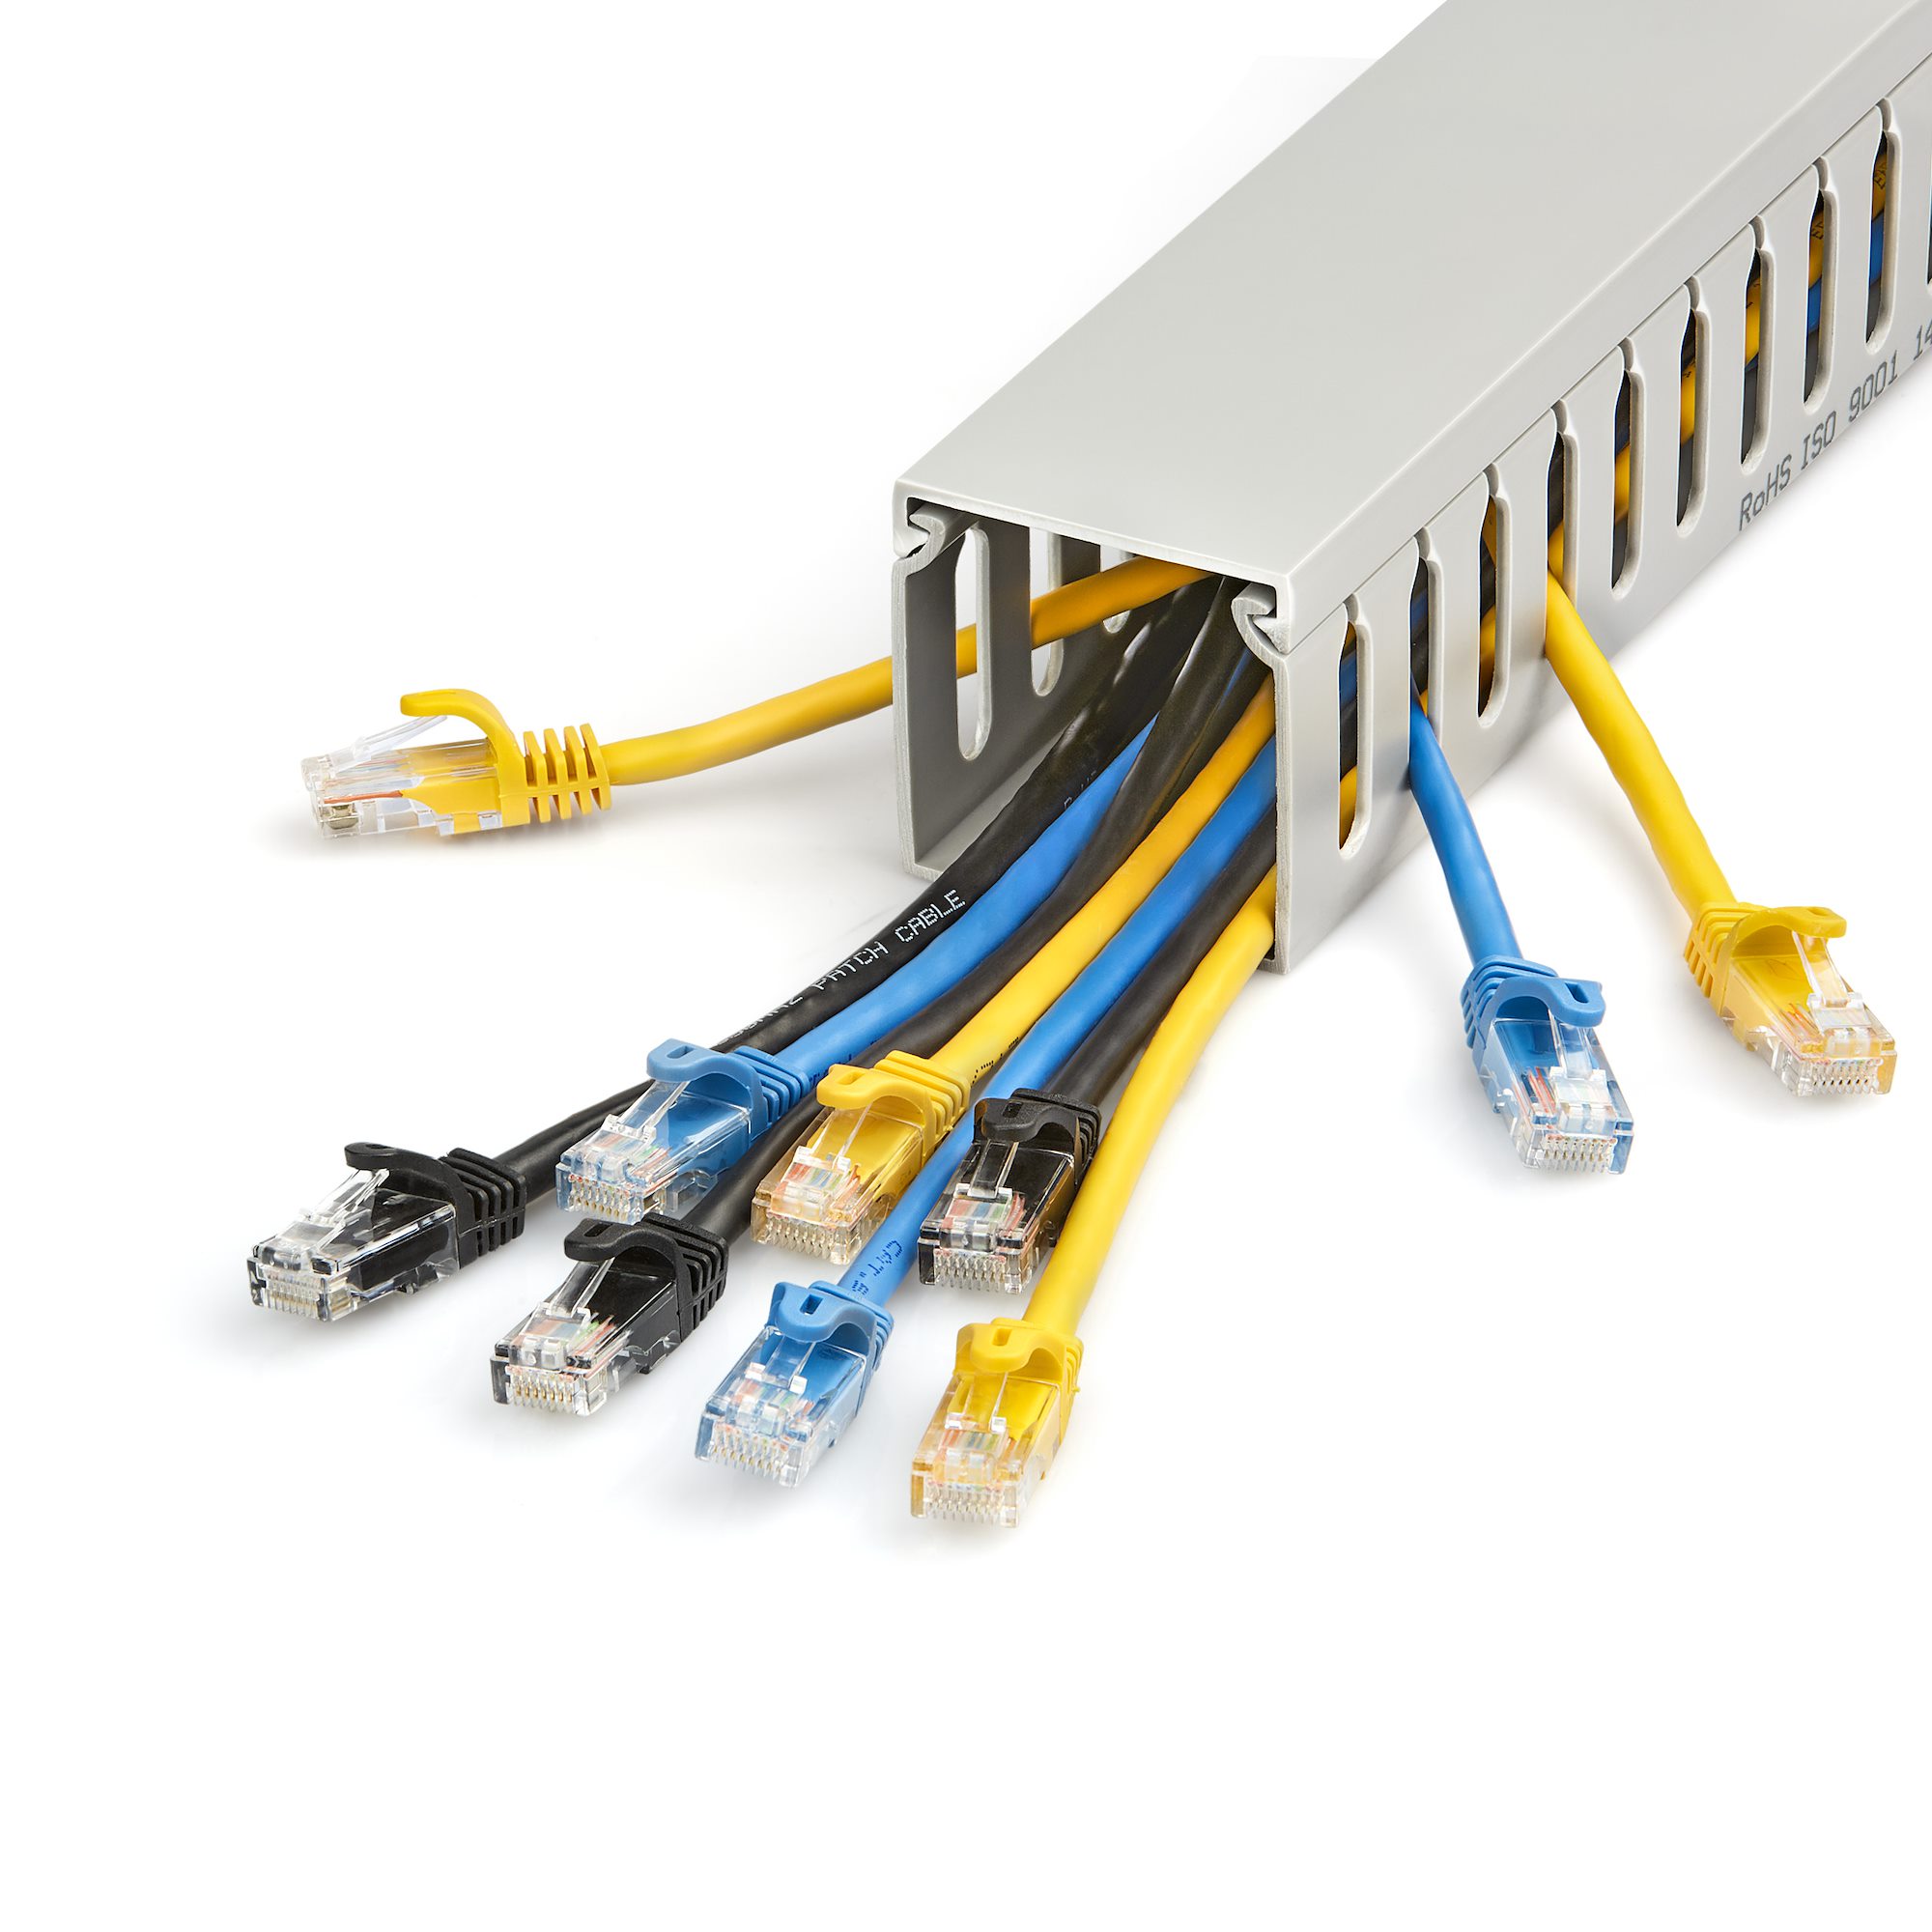 6.5ft Cable Management Raceway w/ Slots - Cable Routing Solutions, Cables